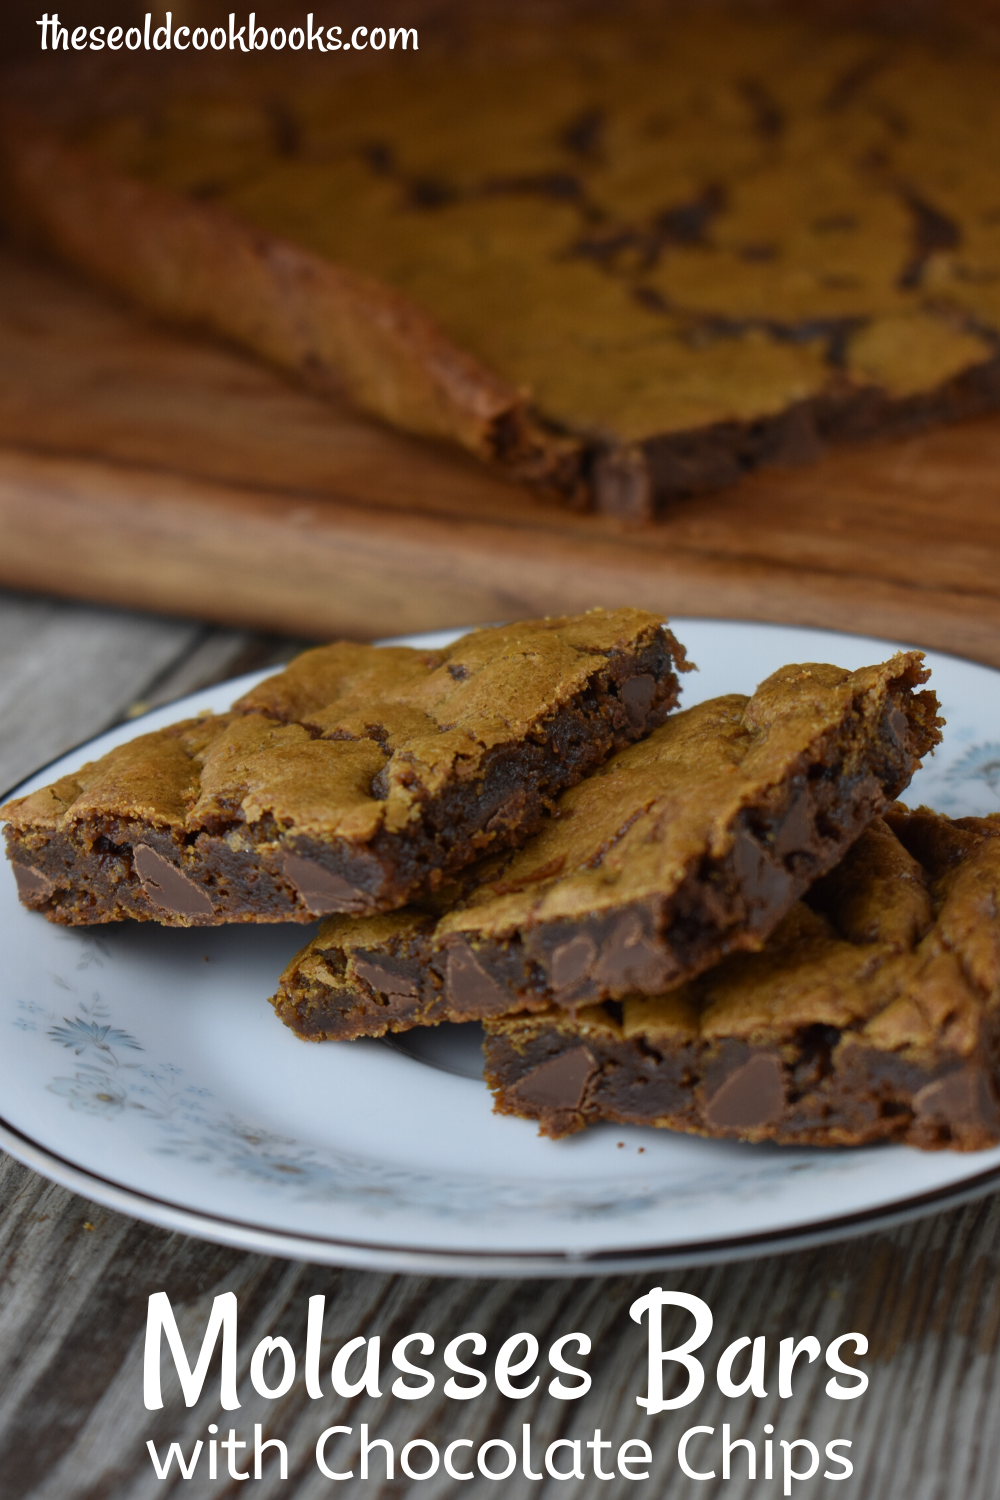 Chocolate Chip Molasses Bars are an old-fashioned molasses cookie with a dense texture.  They have that traditional molasses cookie flavor enhanced with the addition of chocolate chips.  Making these as a bar cookie cuts down time and energy.